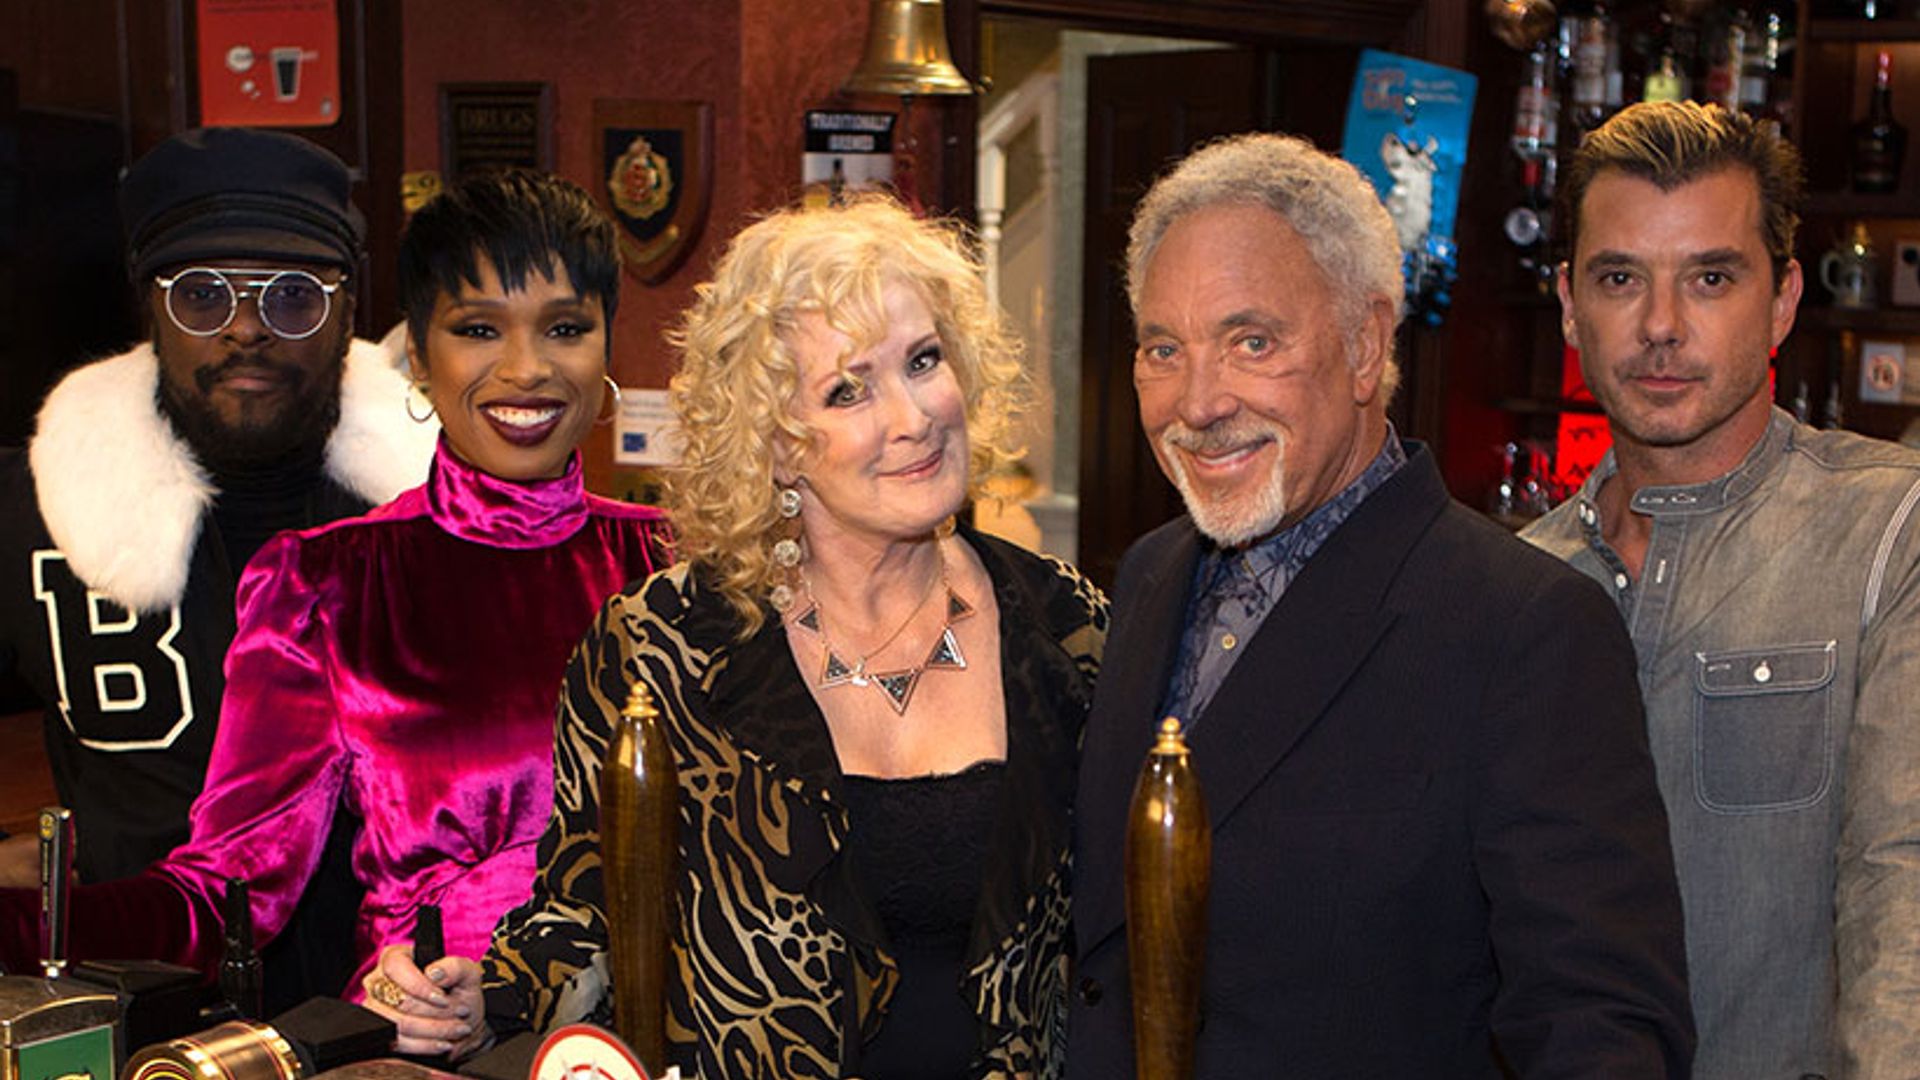 The Voice UK judges enjoy the delights of Coronation Street's Weatherfield: see pictures